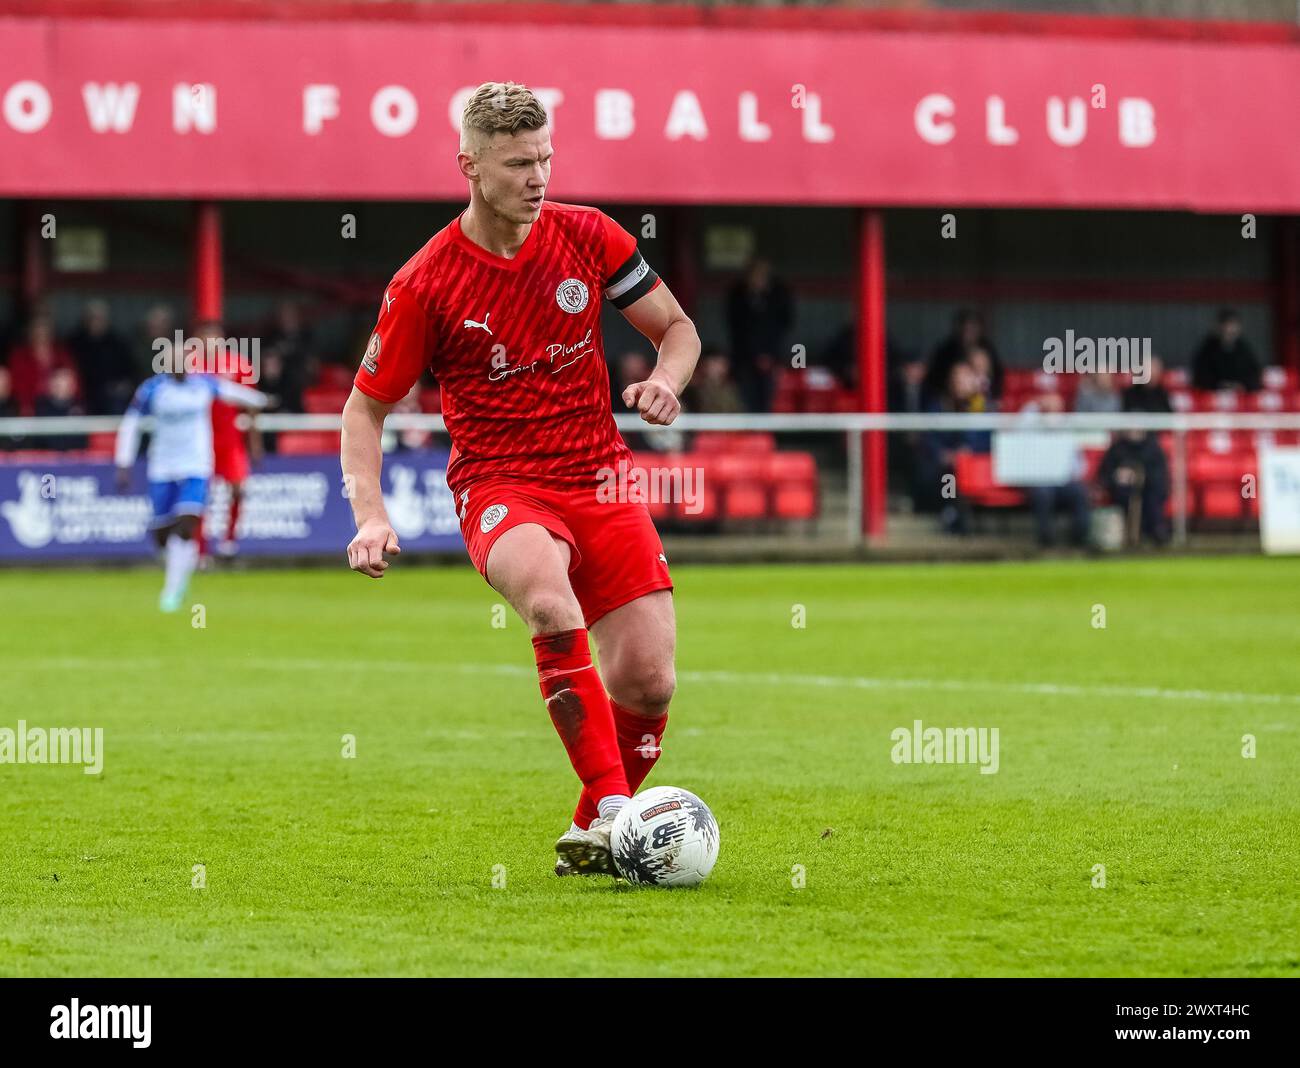 Brackley Town captain Gareth Dean with the ball during their Vanarama National League North match against Tamworth at St James Park on Monday 1st Apri Stock Photo